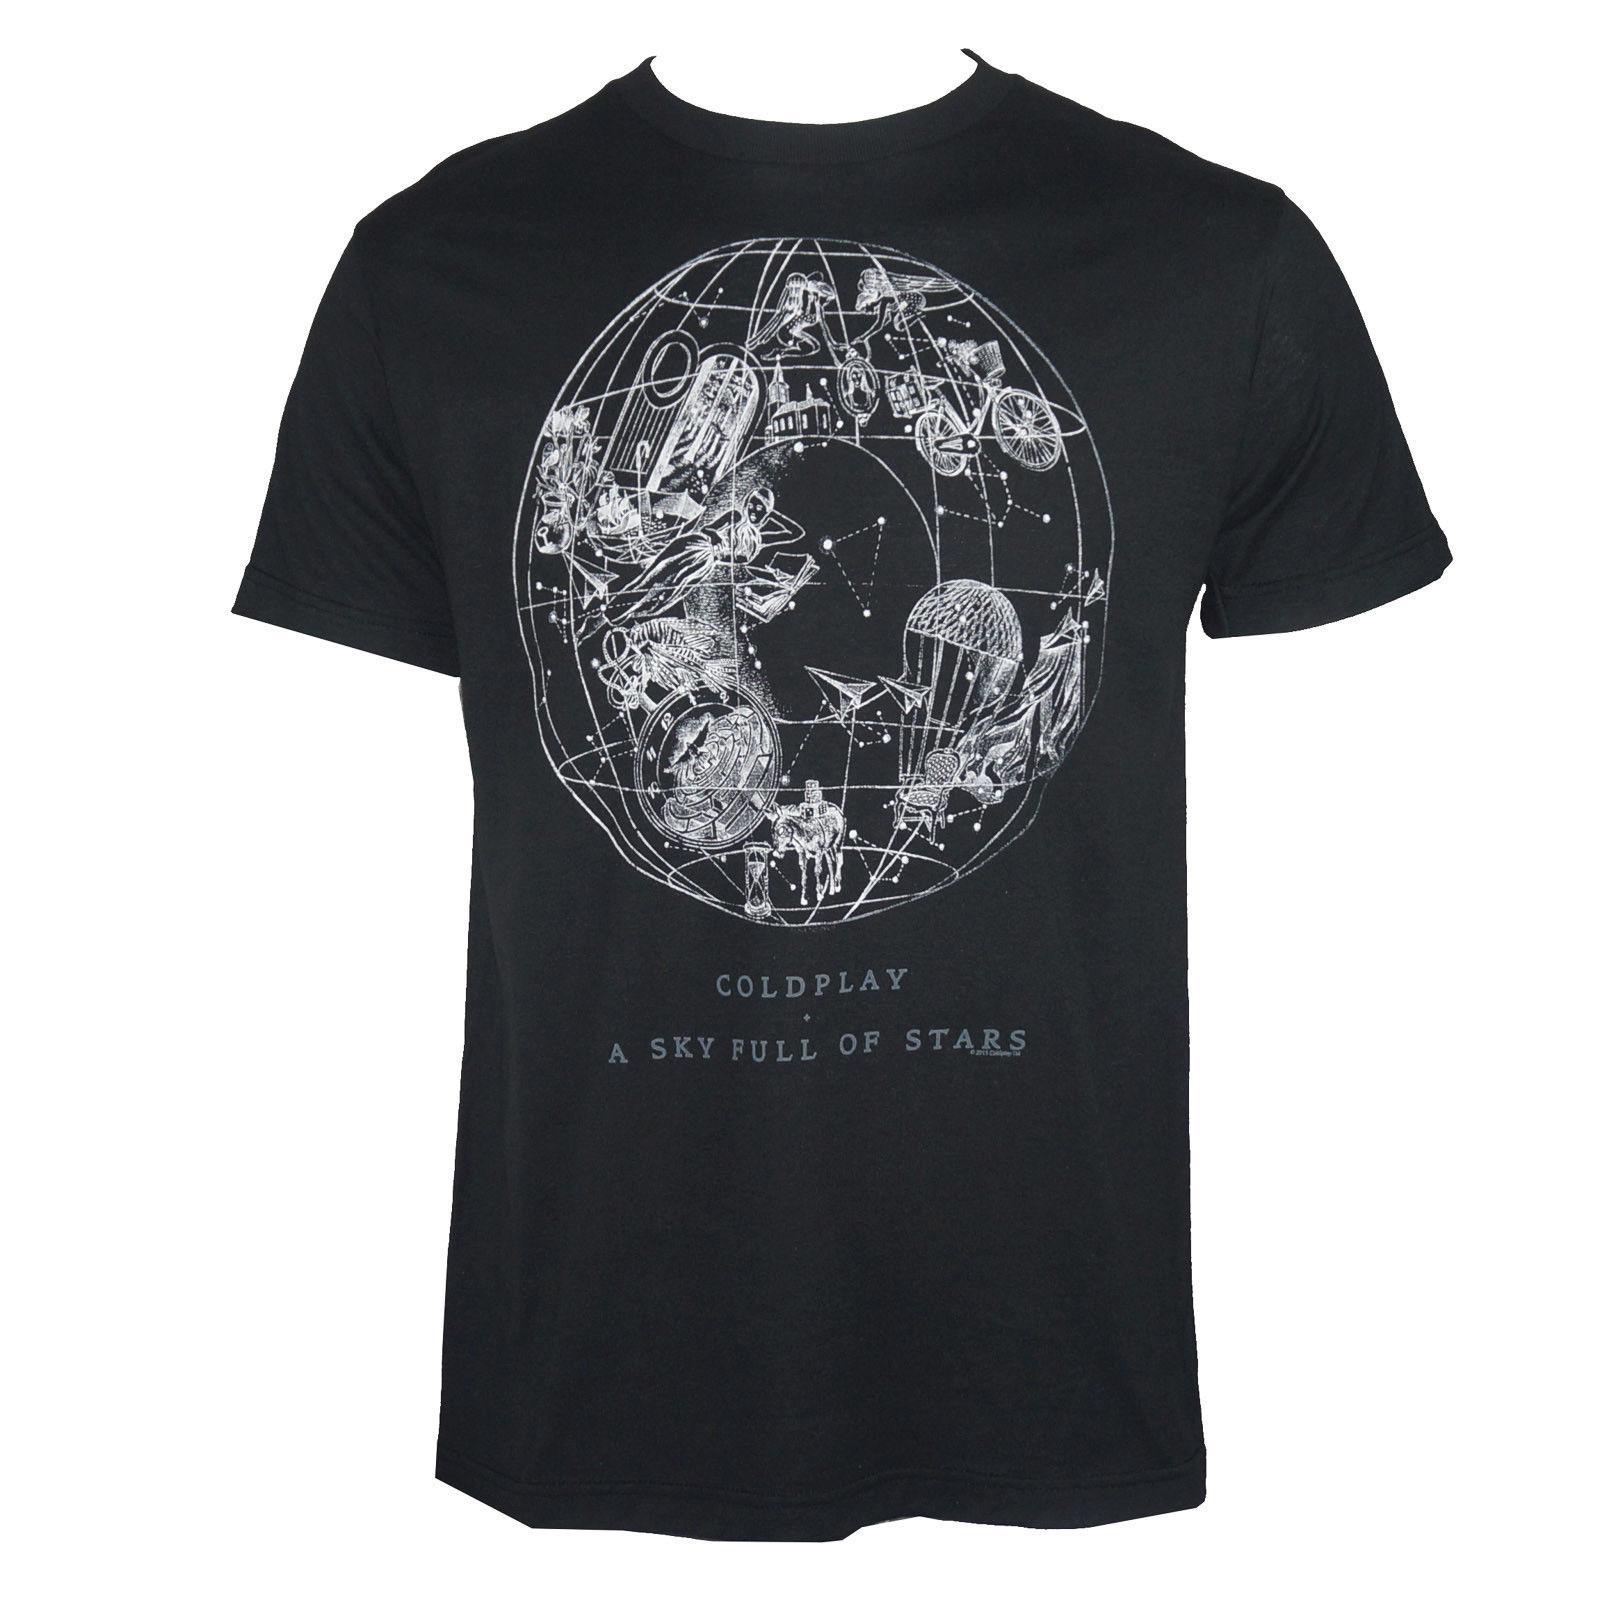 Coldplay Black and White Logo - Authentic COLDPLAY Sky Full Of Stars Logo Black T Shirt S 2XL NEW ...